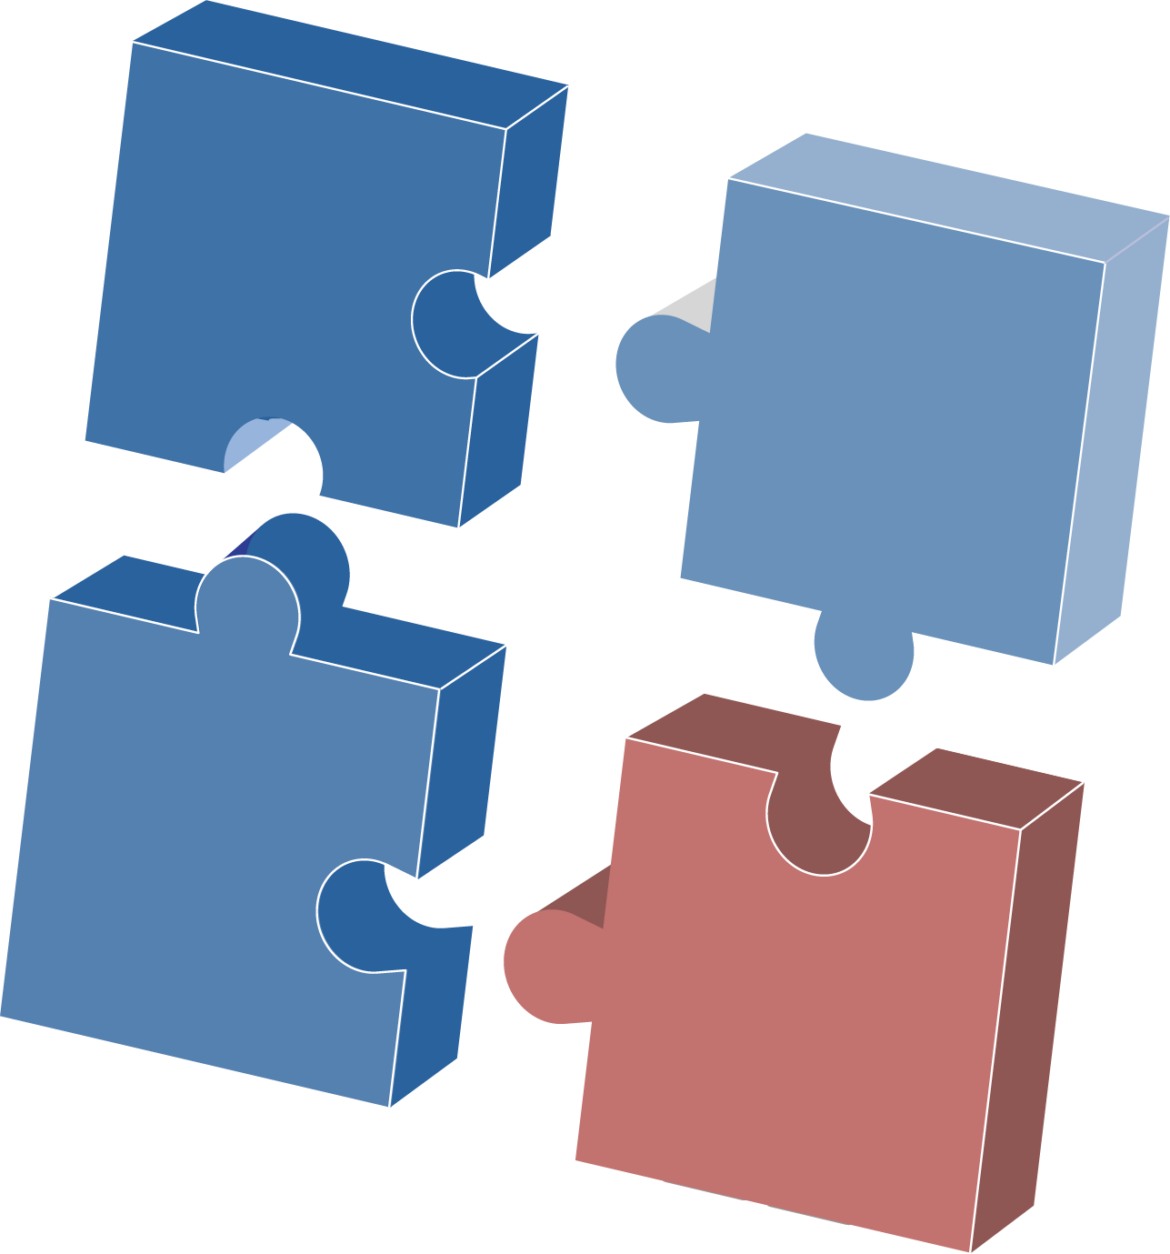 Vector illustration of 4 puzzle pieces, three are shades of blue, one is pink.